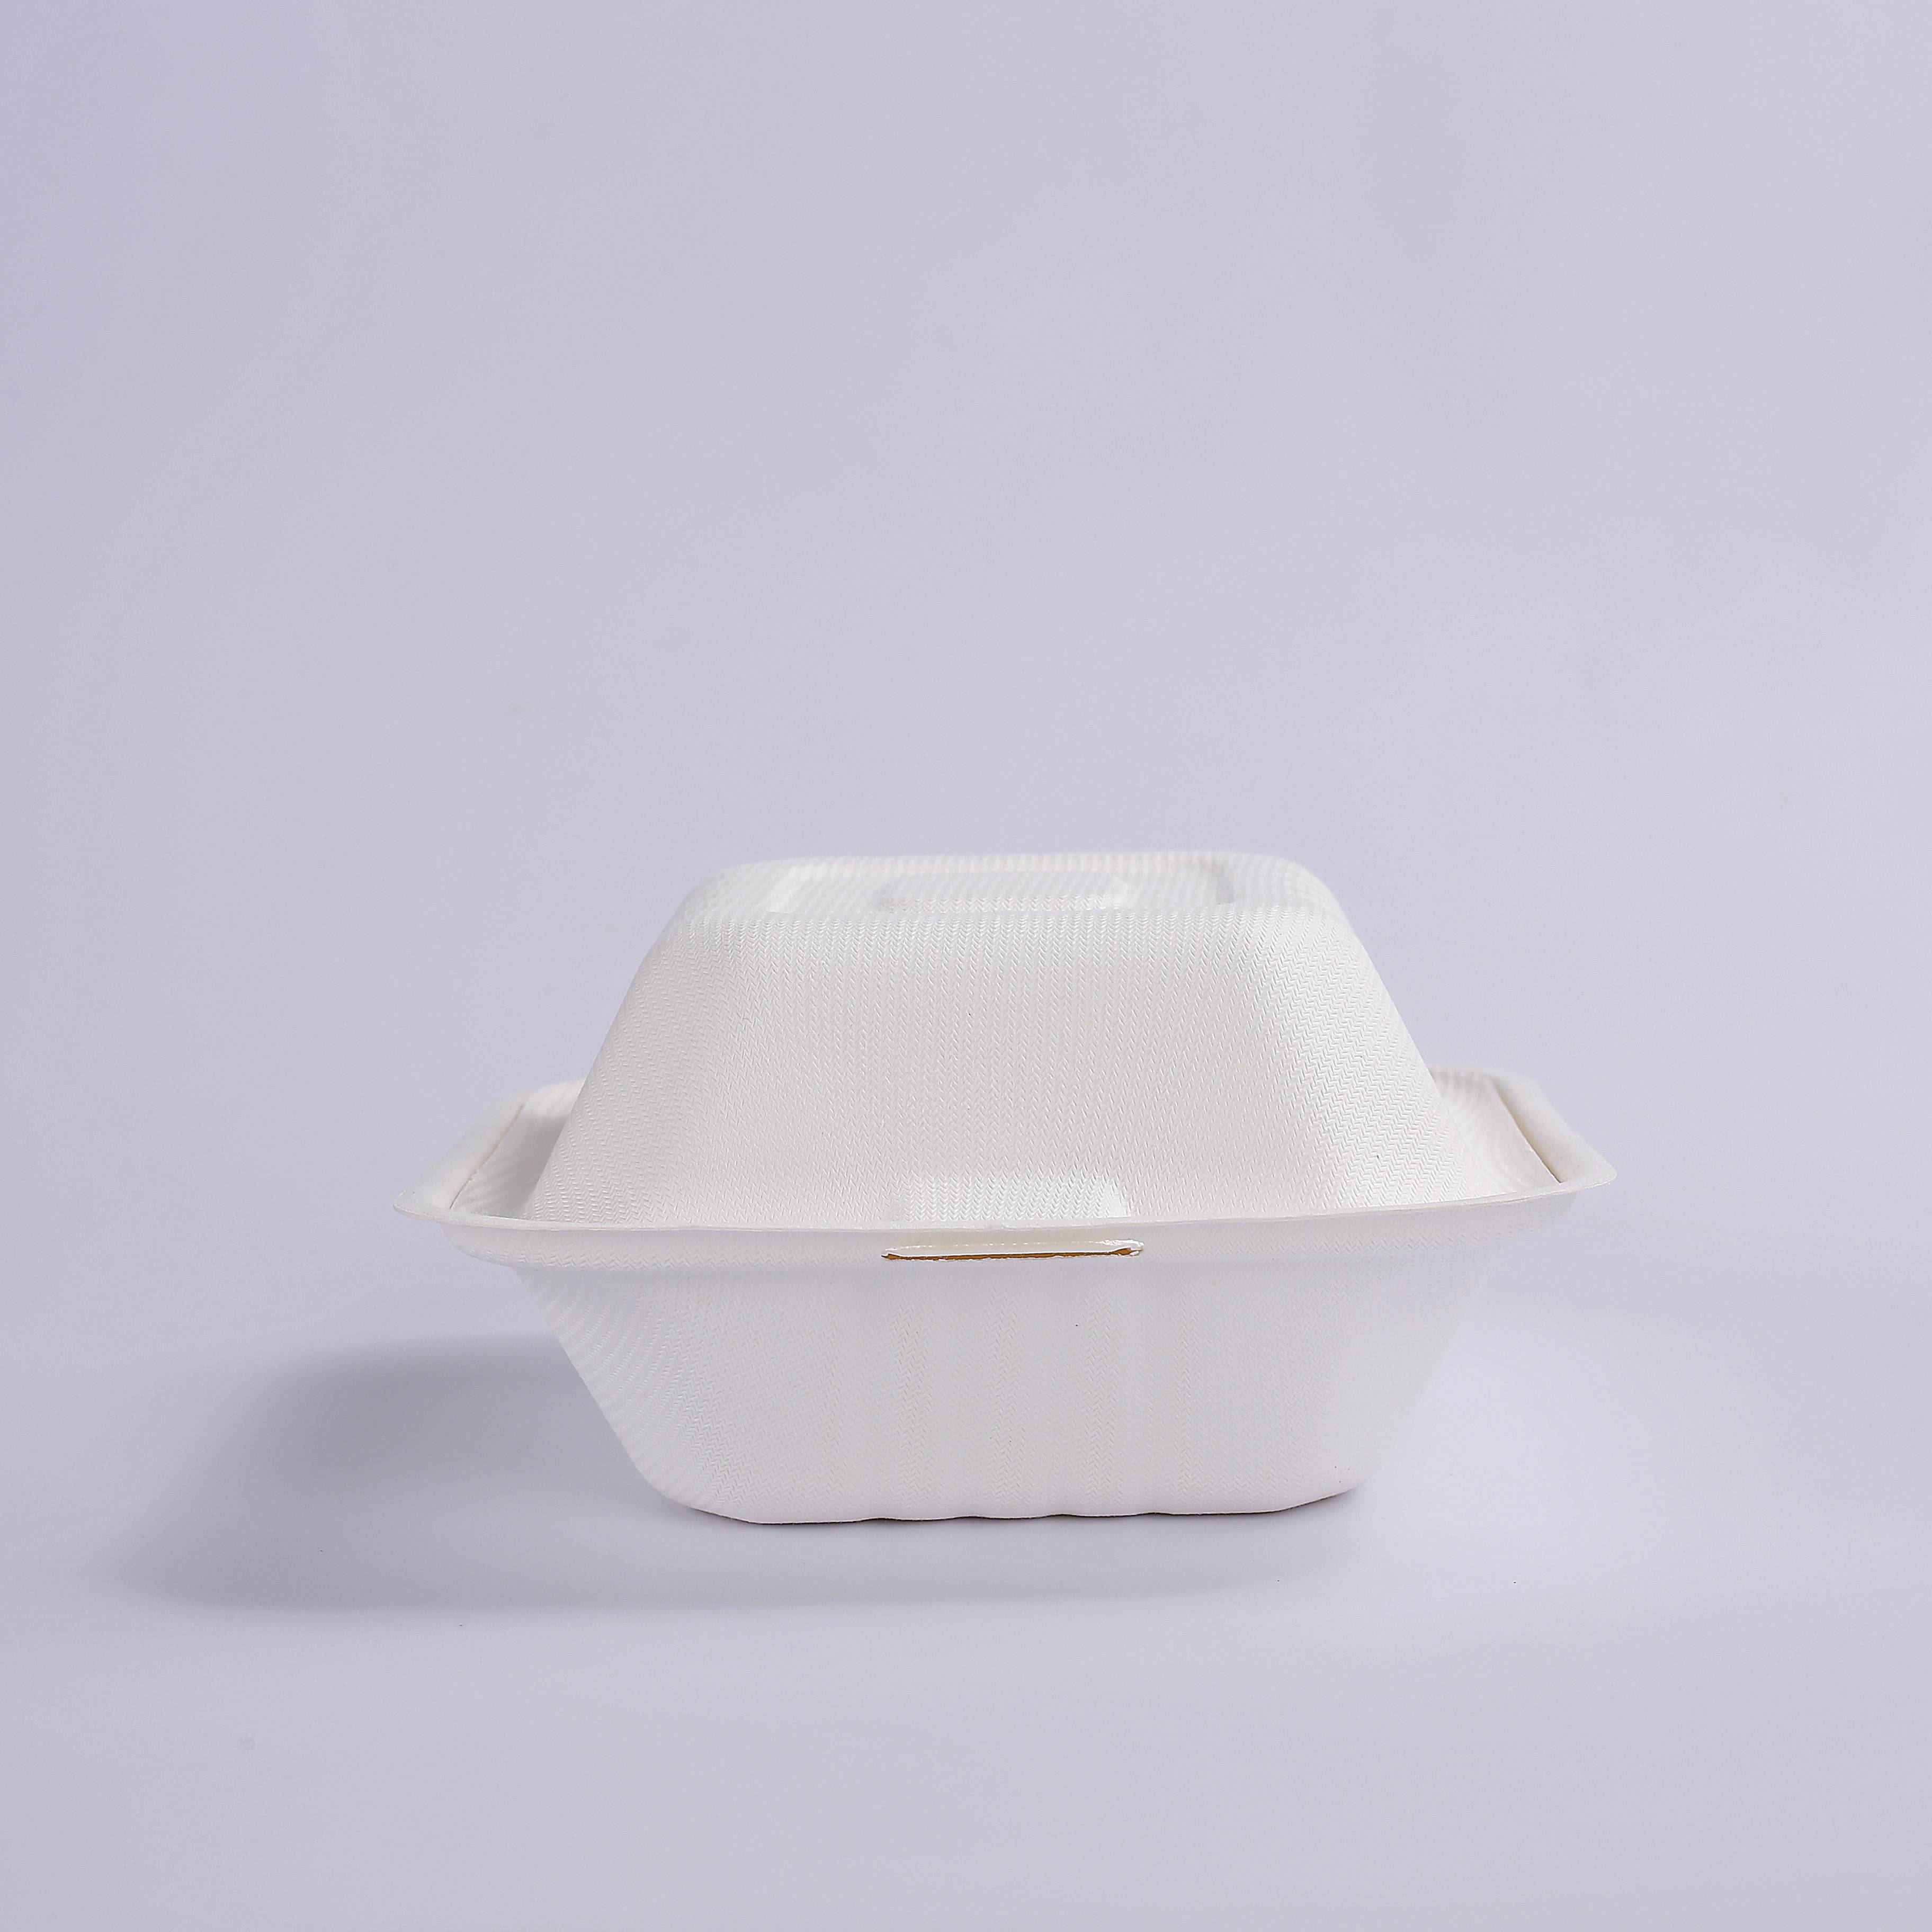 China Disposable Plastic Lunch Box Cup Food Container Manufacturer